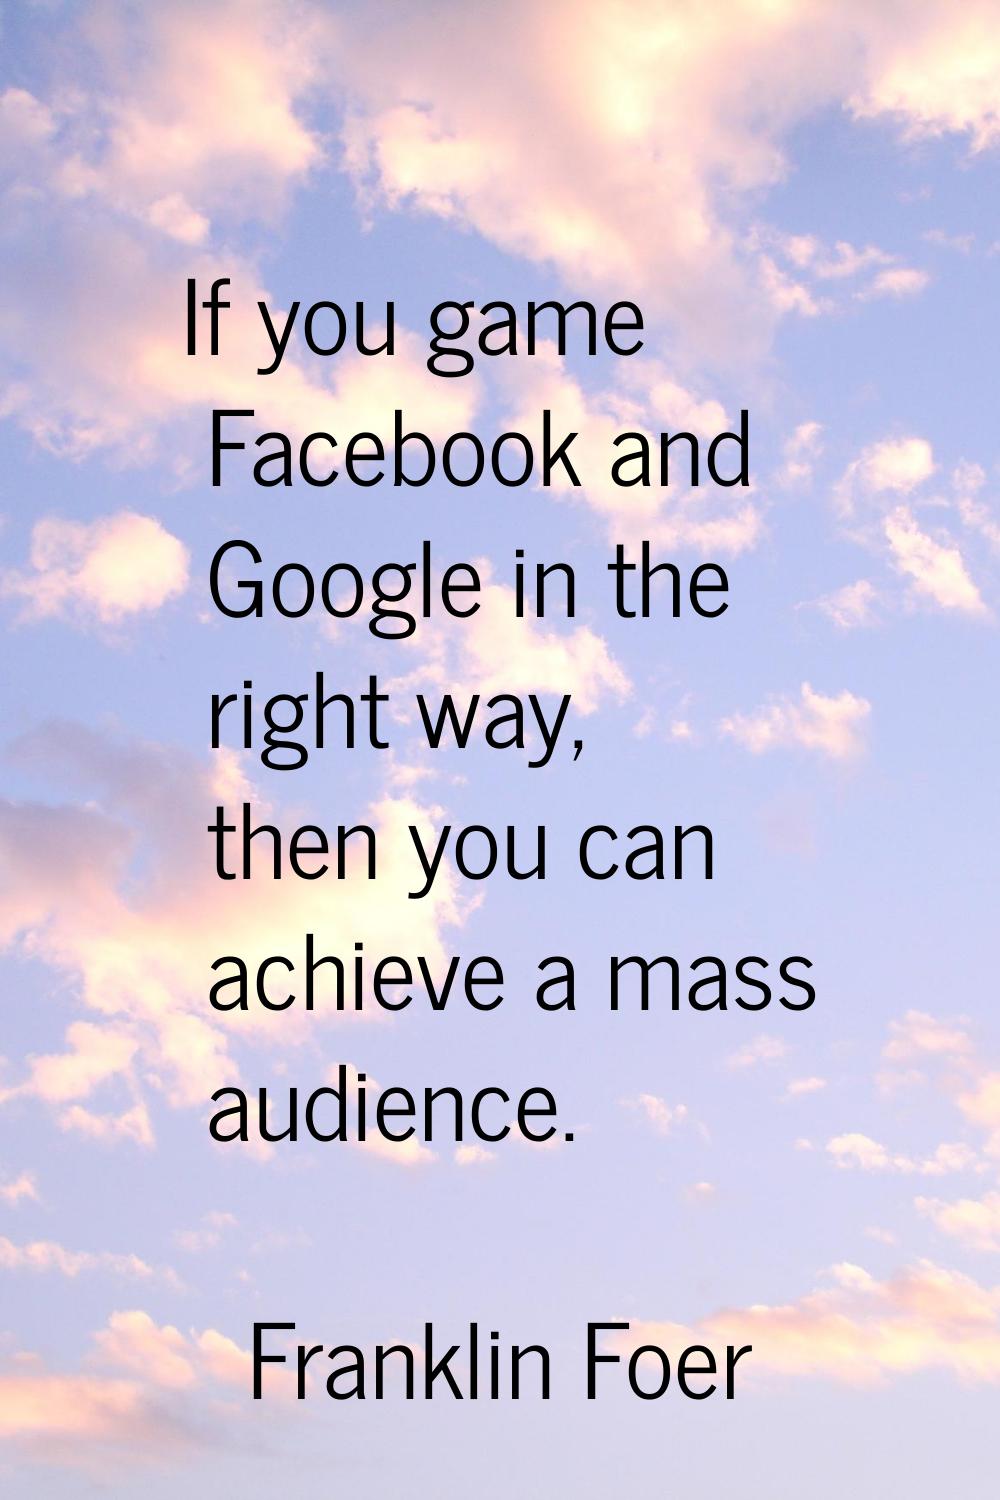 If you game Facebook and Google in the right way, then you can achieve a mass audience.